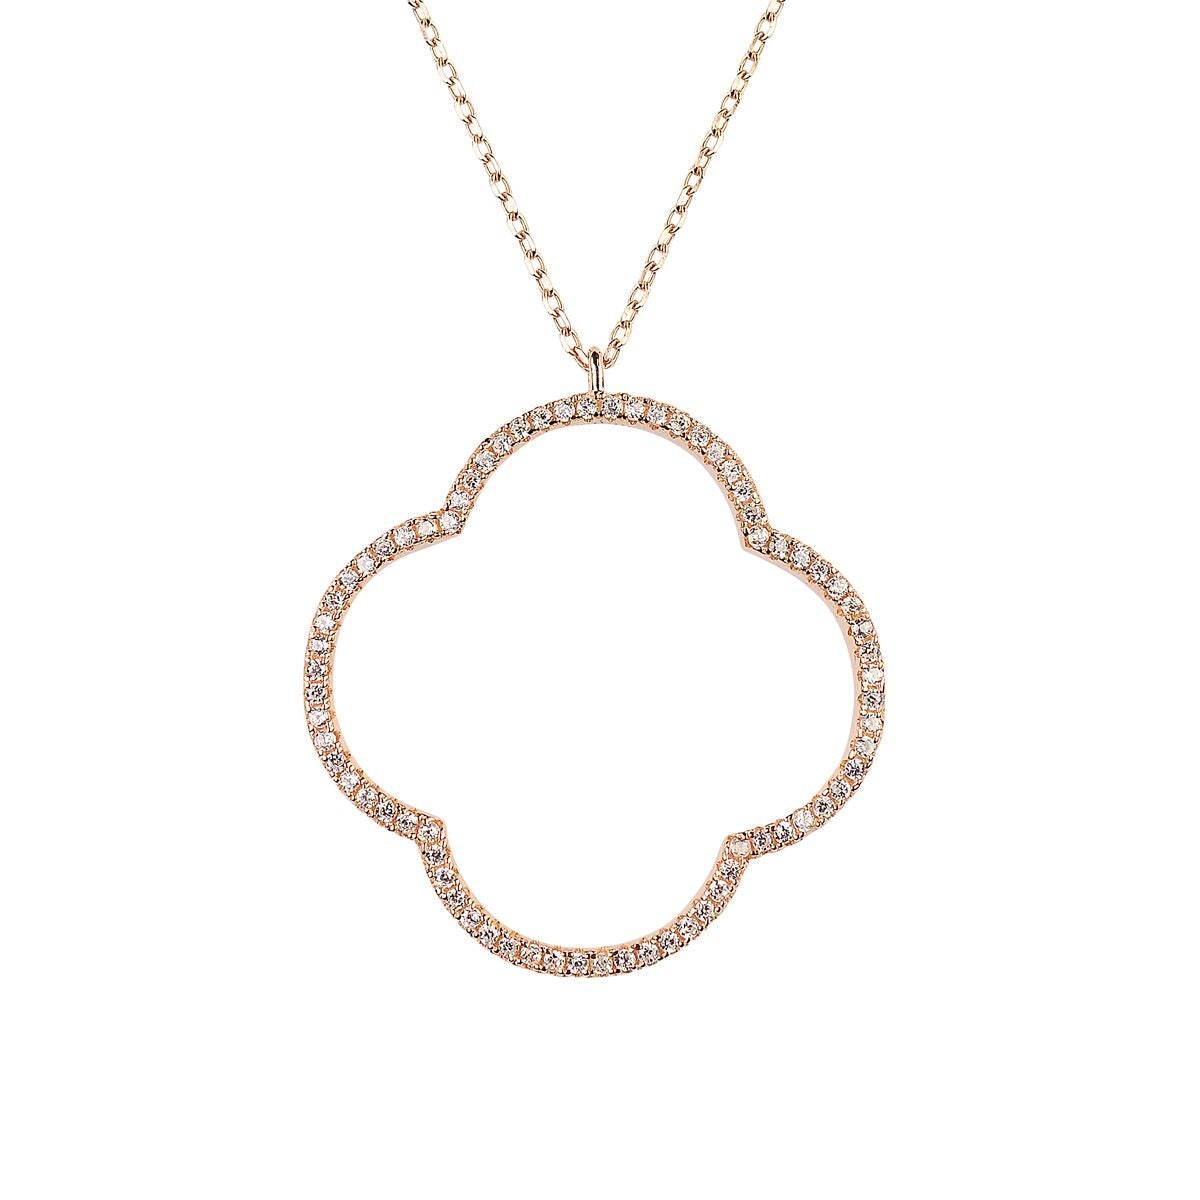 Large clover encrusted with crystals rose gold necklace 